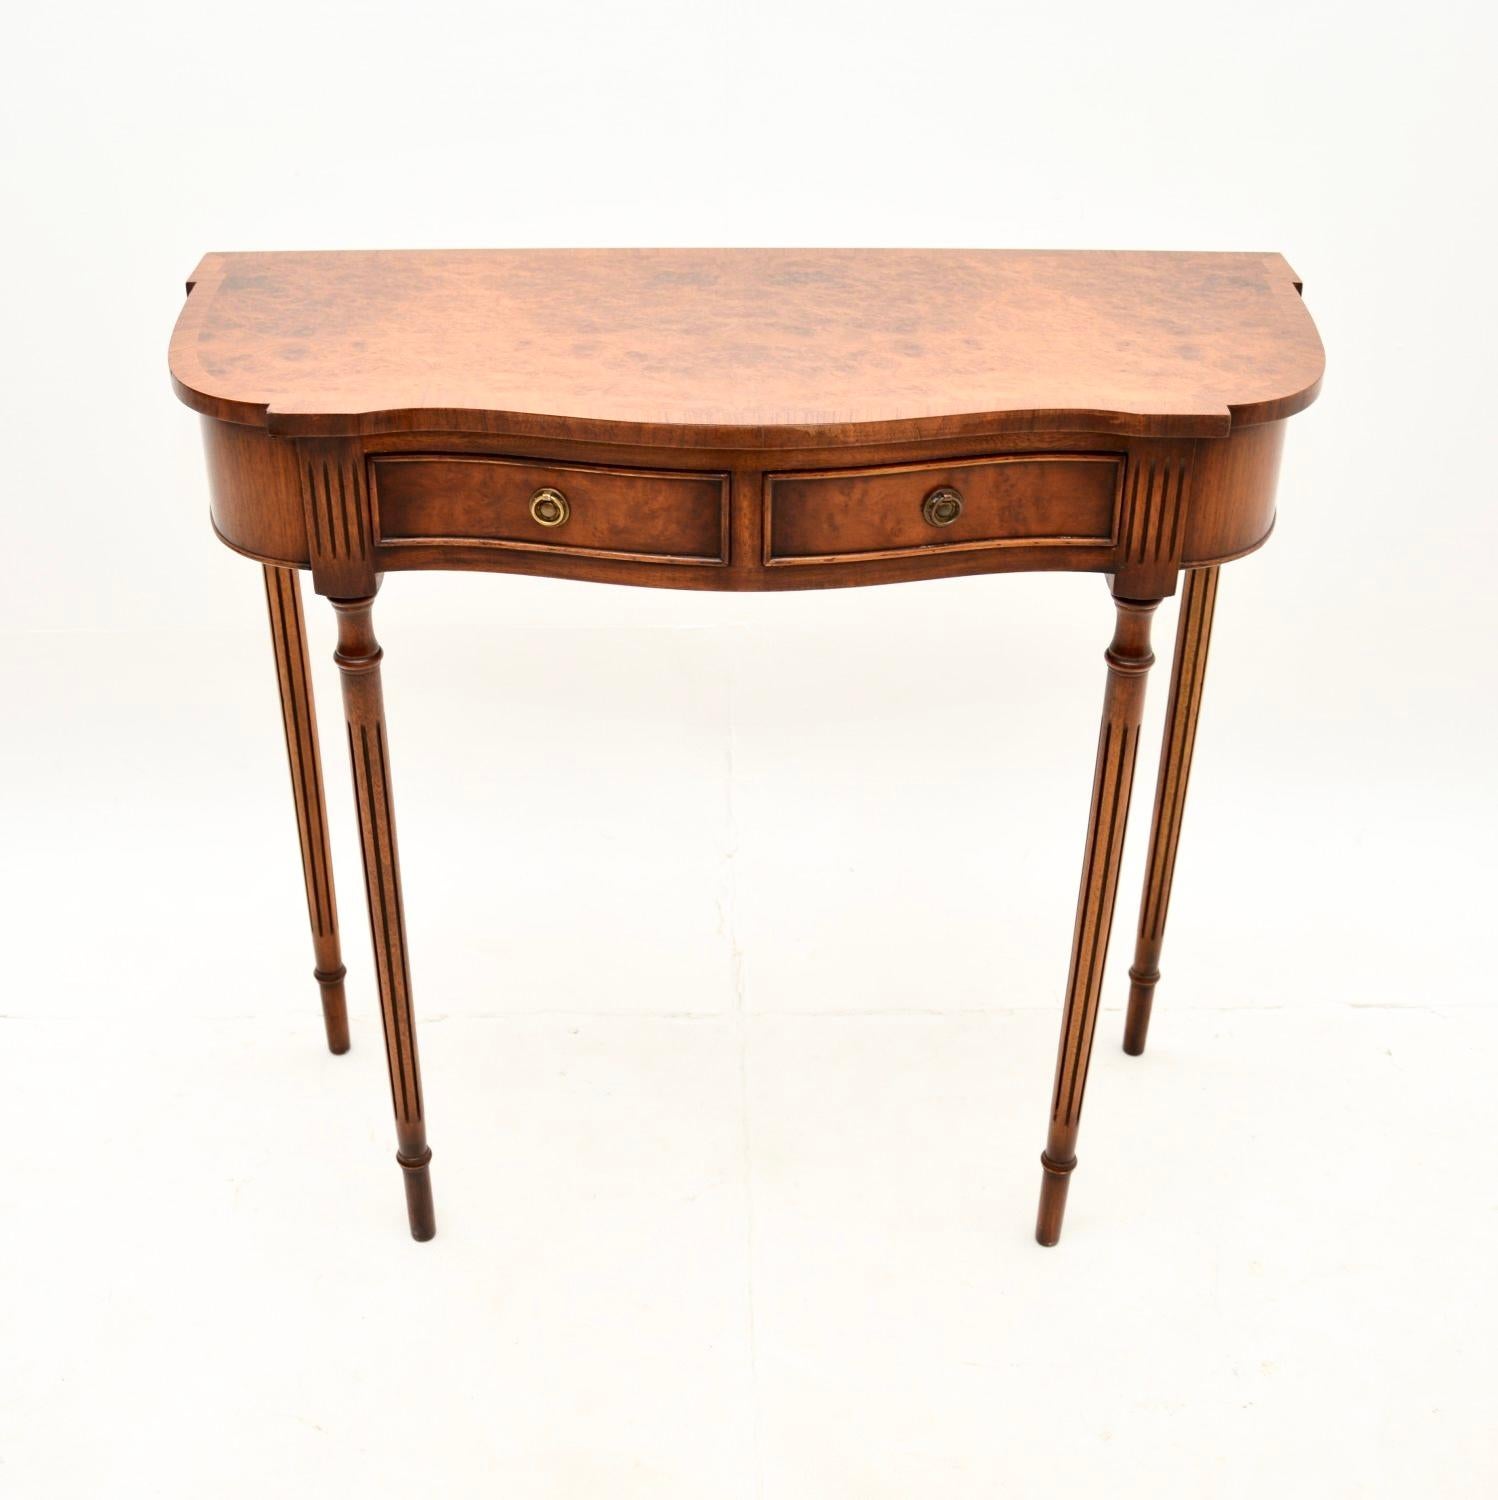 A fine and very well made antique Georgian style burr walnut console table. This was made in England, it dates from around the 1930-50’s.

It is of superb quality and is a very useful size. It is slim and elegant yet sturdy, the top has a serpentine